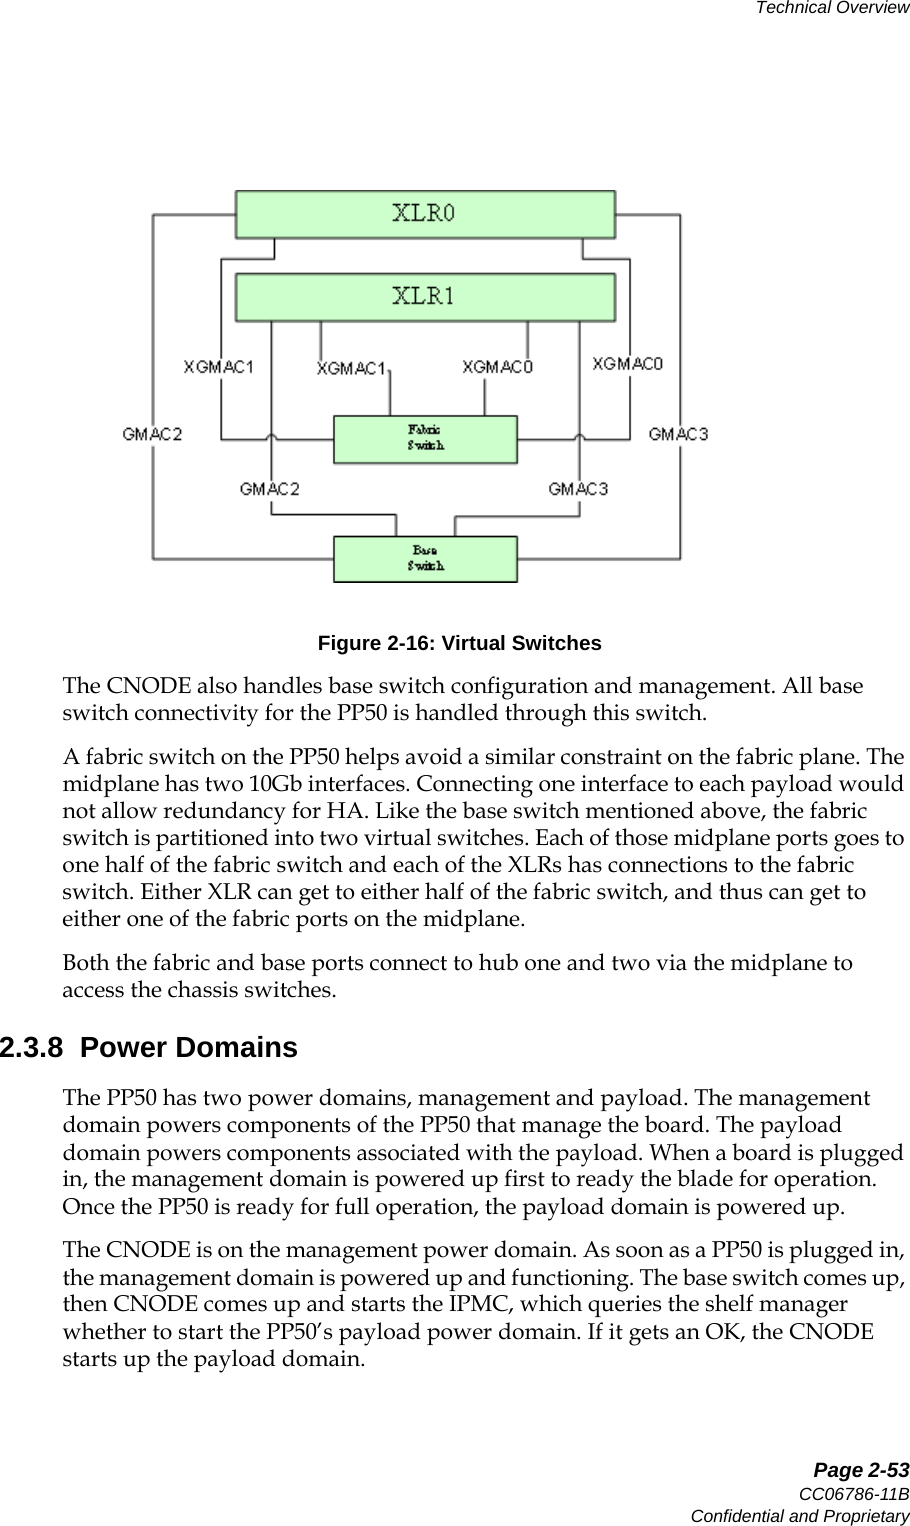   Page 2-53CC06786-11BConfidential and ProprietaryTechnical Overview14ABABPreliminaryFigure 2-16: Virtual SwitchesThe CNODE also handles base switch configuration and management. All base switch connectivity for the PP50 is handled through this switch.A fabric switch on the PP50 helps avoid a similar constraint on the fabric plane. The midplane has two 10Gb interfaces. Connecting one interface to each payload would not allow redundancy for HA. Like the base switch mentioned above, the fabric switch is partitioned into two virtual switches. Each of those midplane ports goes to one half of the fabric switch and each of the XLRs has connections to the fabric switch. Either XLR can get to either half of the fabric switch, and thus can get to either one of the fabric ports on the midplane.Both the fabric and base ports connect to hub one and two via the midplane to access the chassis switches.2.3.8  Power DomainsThe PP50 has two power domains, management and payload. The management domain powers components of the PP50 that manage the board. The payload domain powers components associated with the payload. When a board is plugged in, the management domain is powered up first to ready the blade for operation. Once the PP50 is ready for full operation, the payload domain is powered up. The CNODE is on the management power domain. As soon as a PP50 is plugged in, the management domain is powered up and functioning. The base switch comes up, then CNODE comes up and starts the IPMC, which queries the shelf manager whether to start the PP50’s payload power domain. If it gets an OK, the CNODE starts up the payload domain.